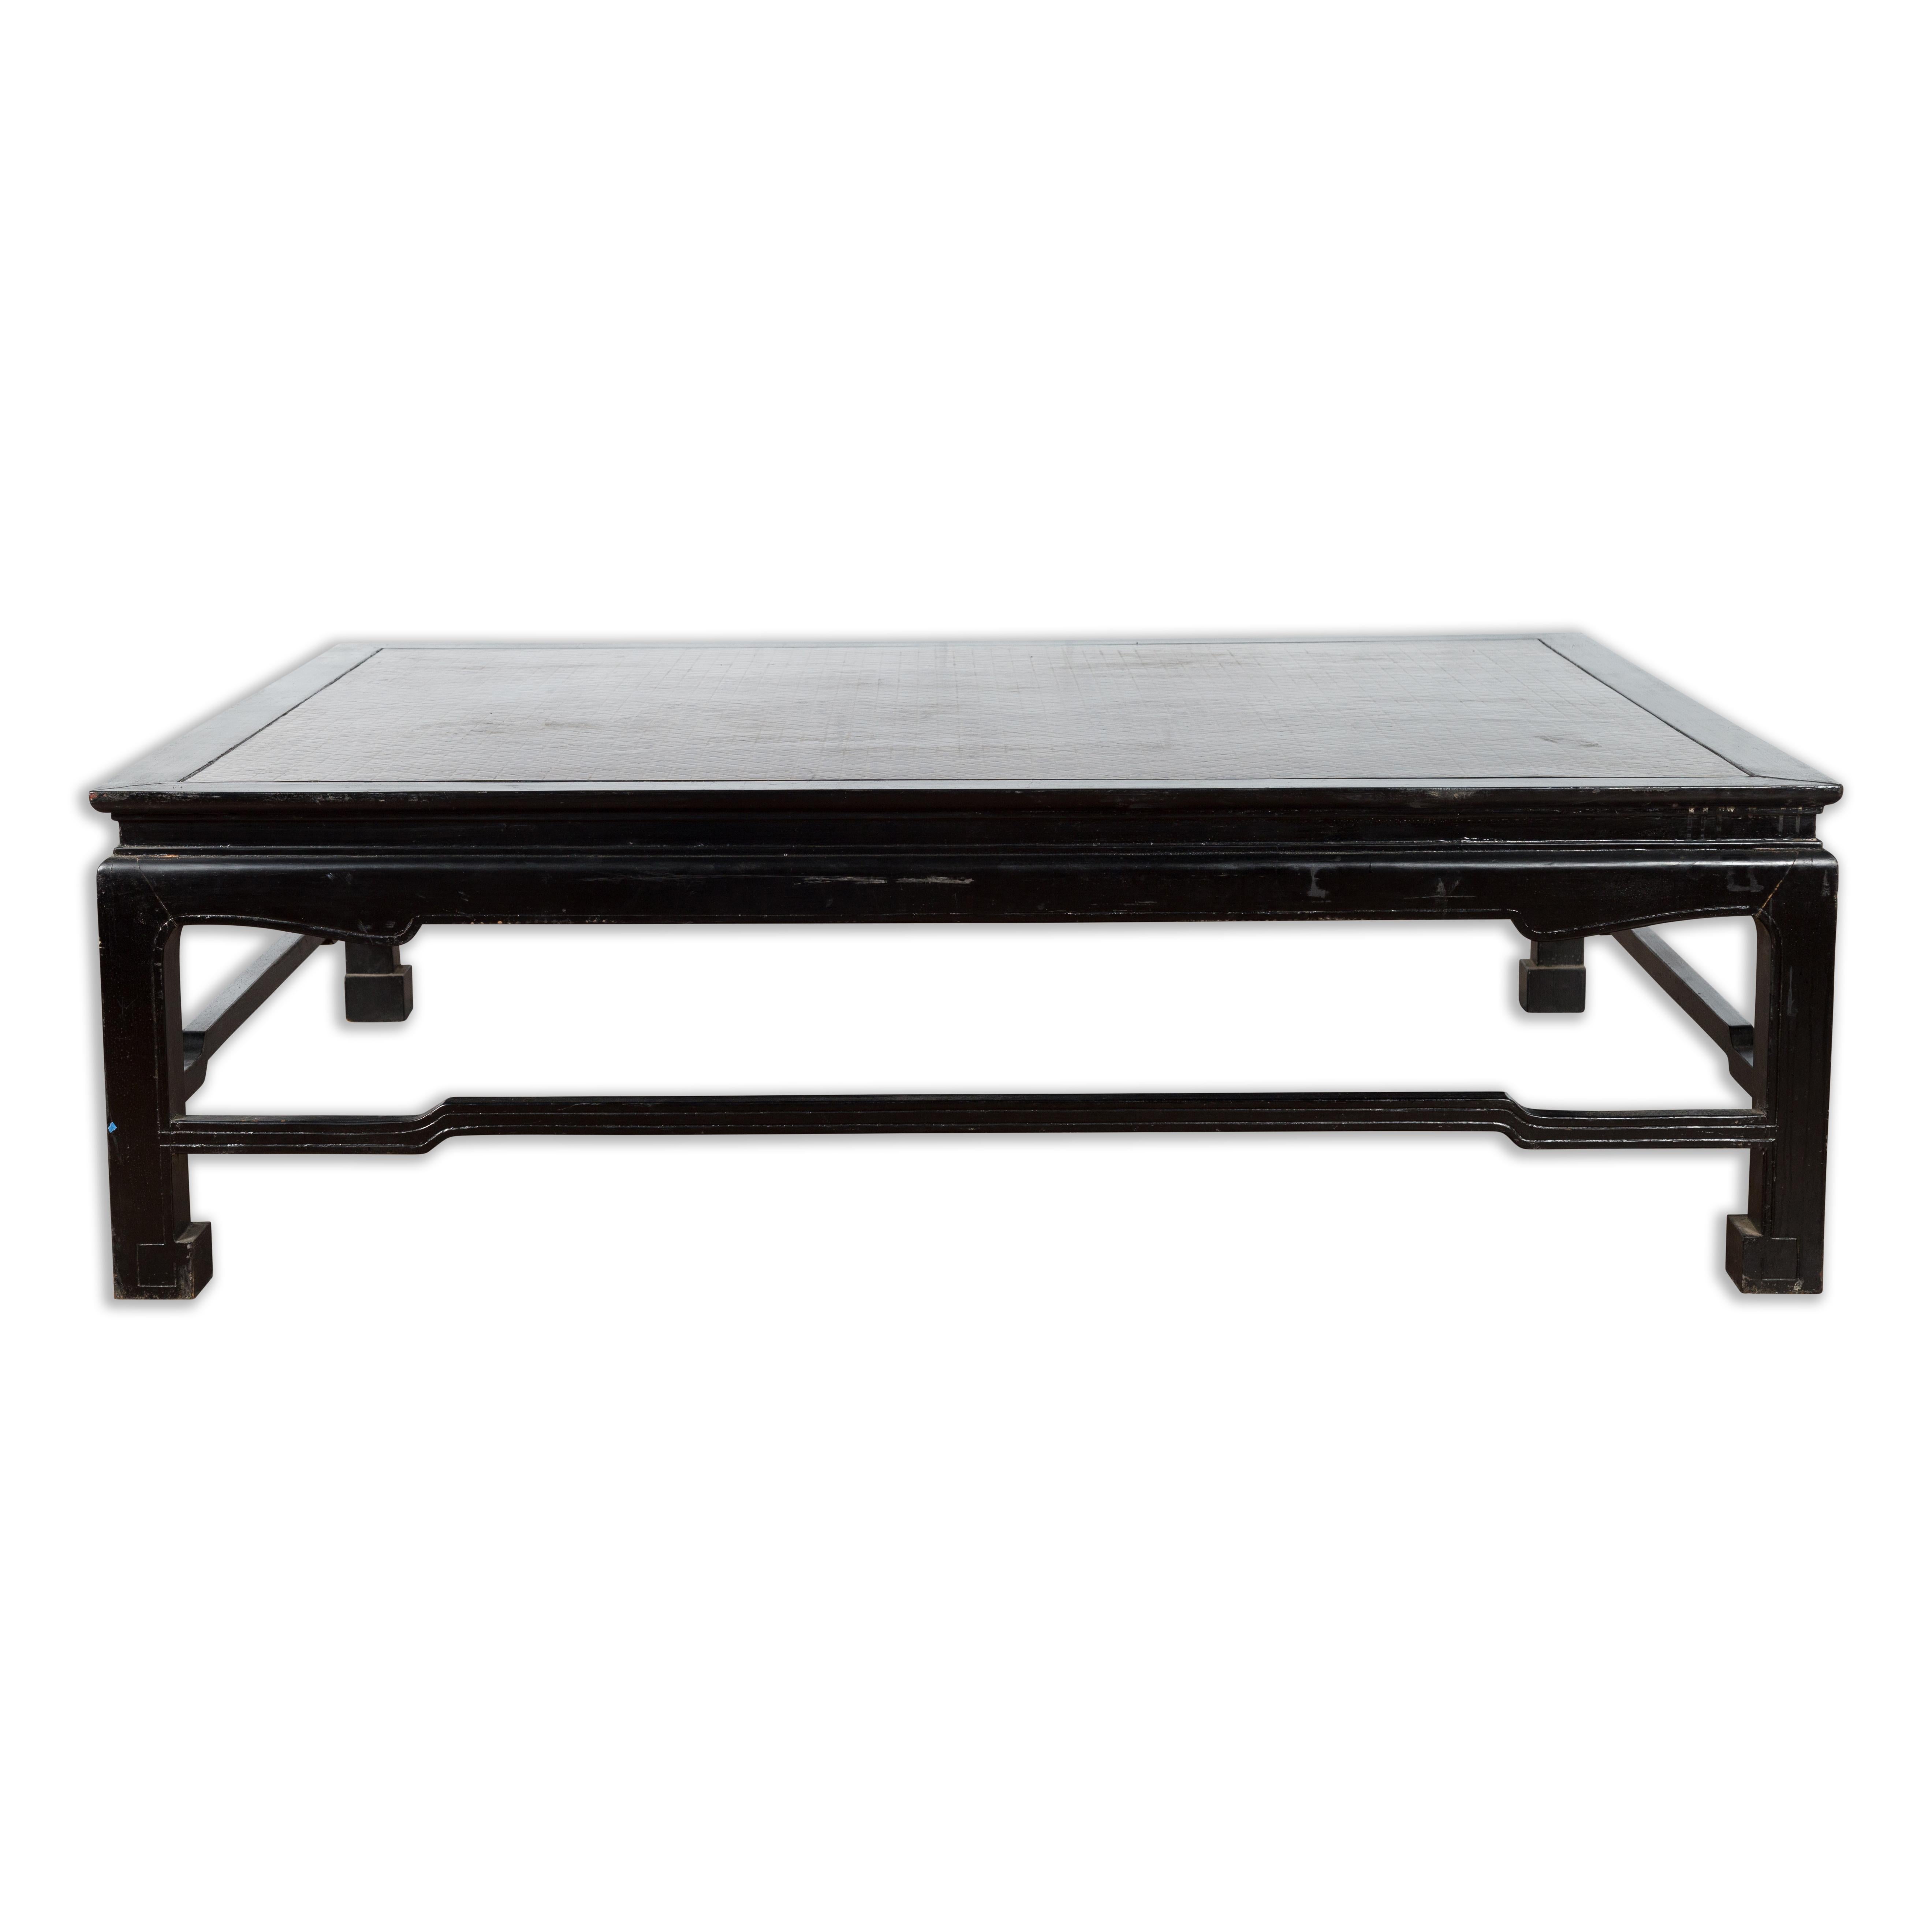 Burmese Vintage Black Lacquer Low Coffee Table with Negora Lacquer Inset Top For Sale 2